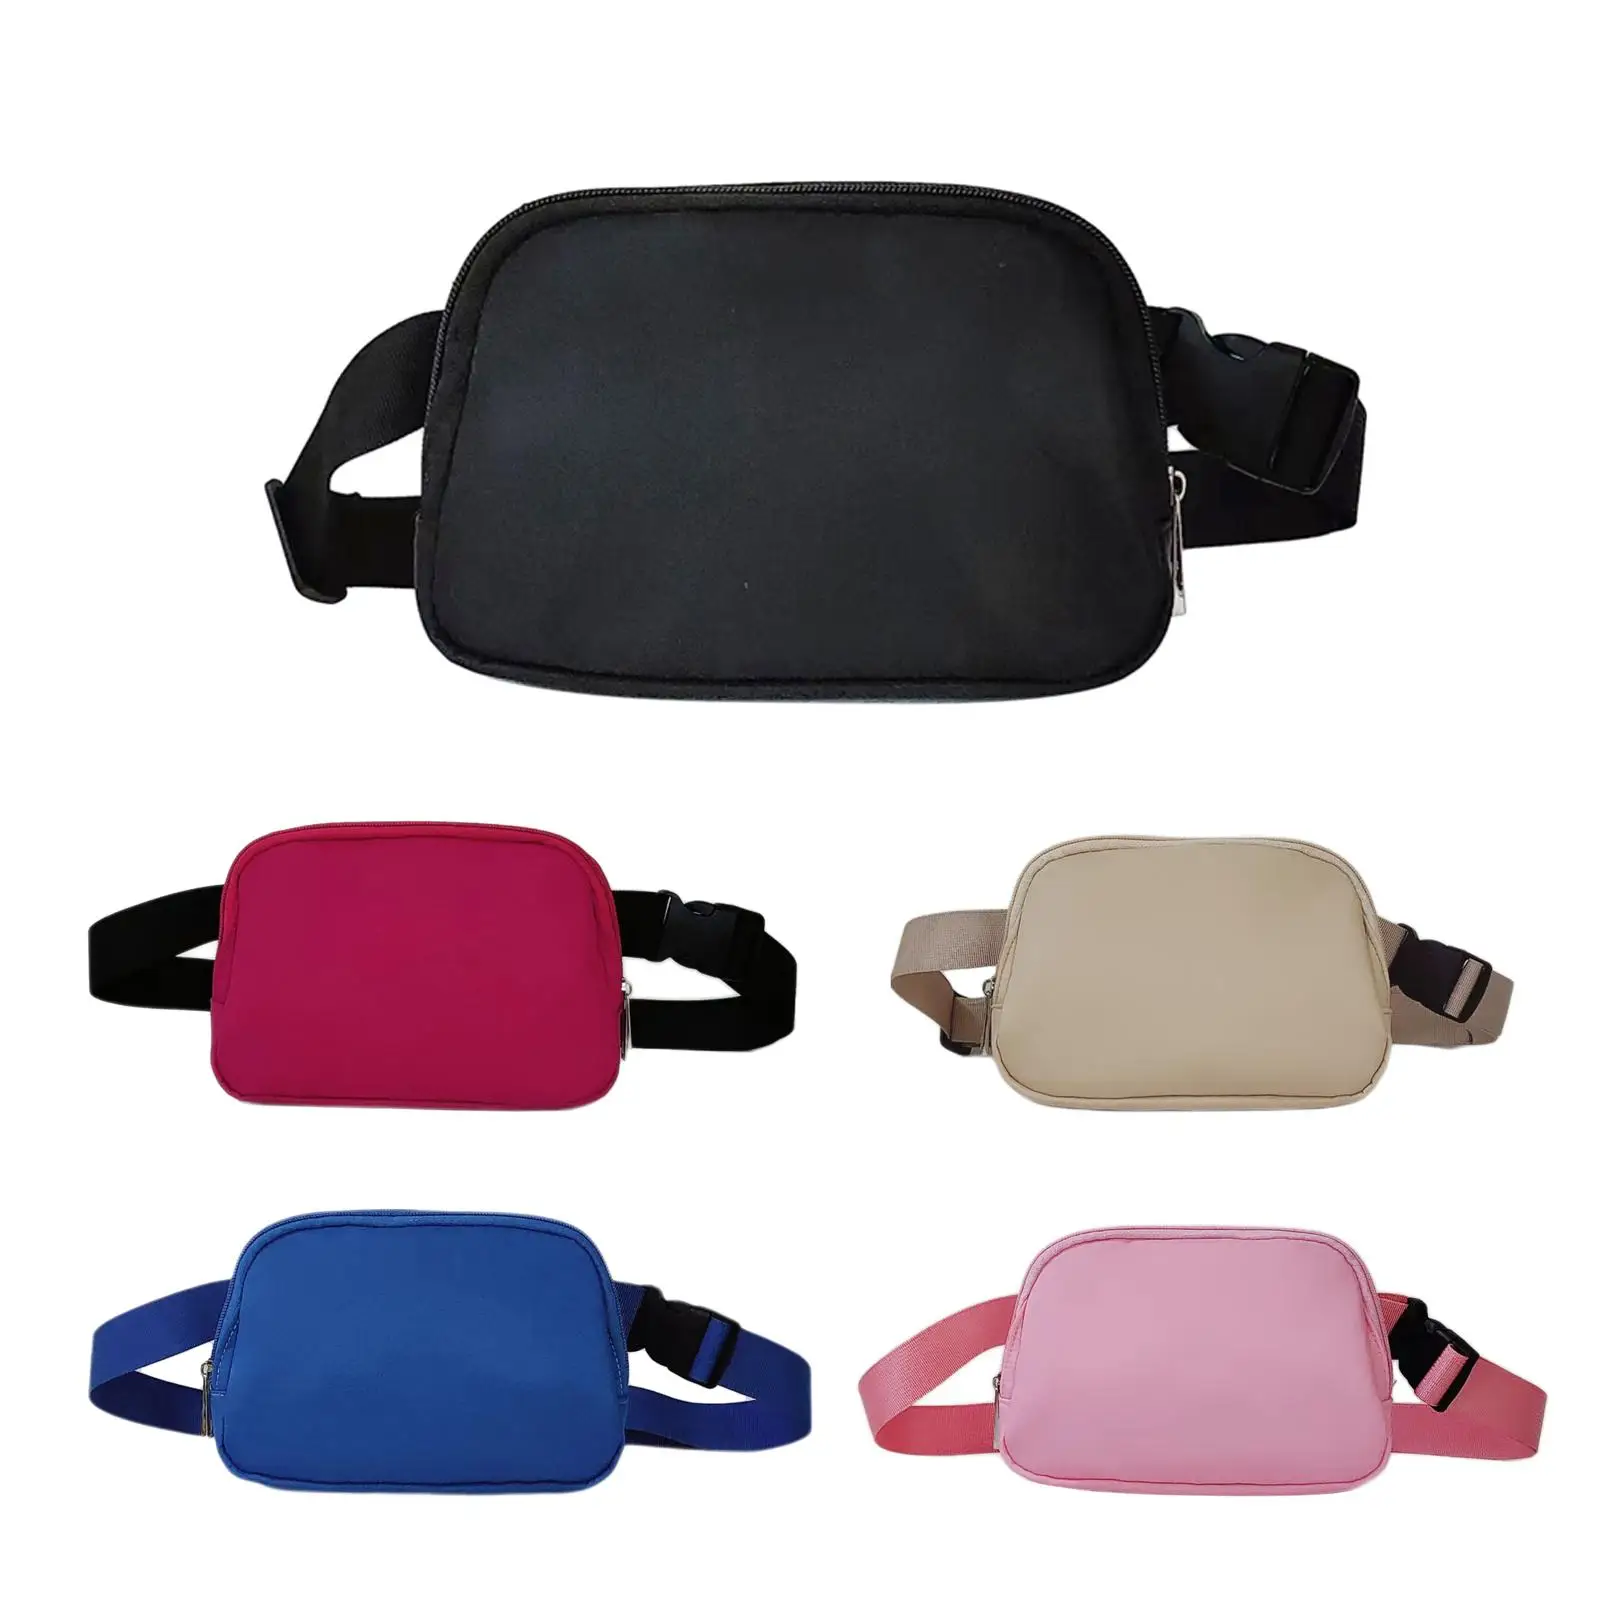 Waist Bag Fanny Pack Phone Holder Chest Bag with Adjustable Strap for Sports